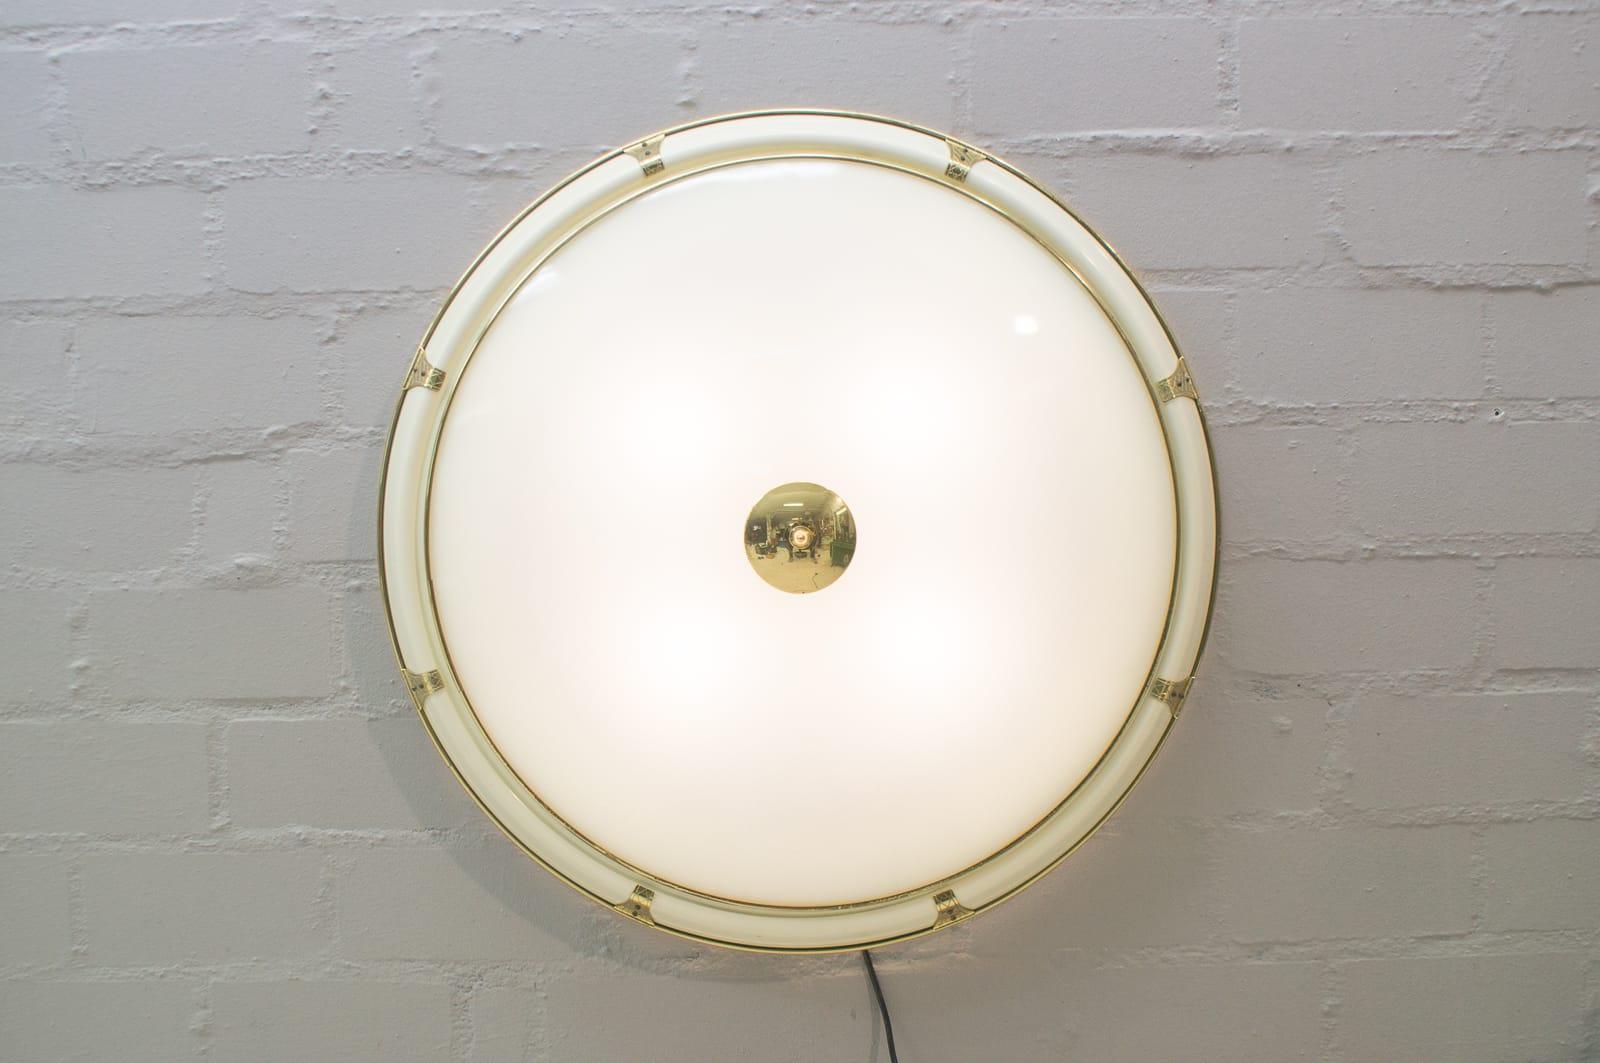 Rare and elegant Mid-Century Modern flush mount or wall lamp, 1950s, Austria. Executed in lacquered metal, brass and glass.

The lamp is executed with 4 x E27 Edison screw fit bulbs. It is wired, and in working condition. It runs both on 110 / 230